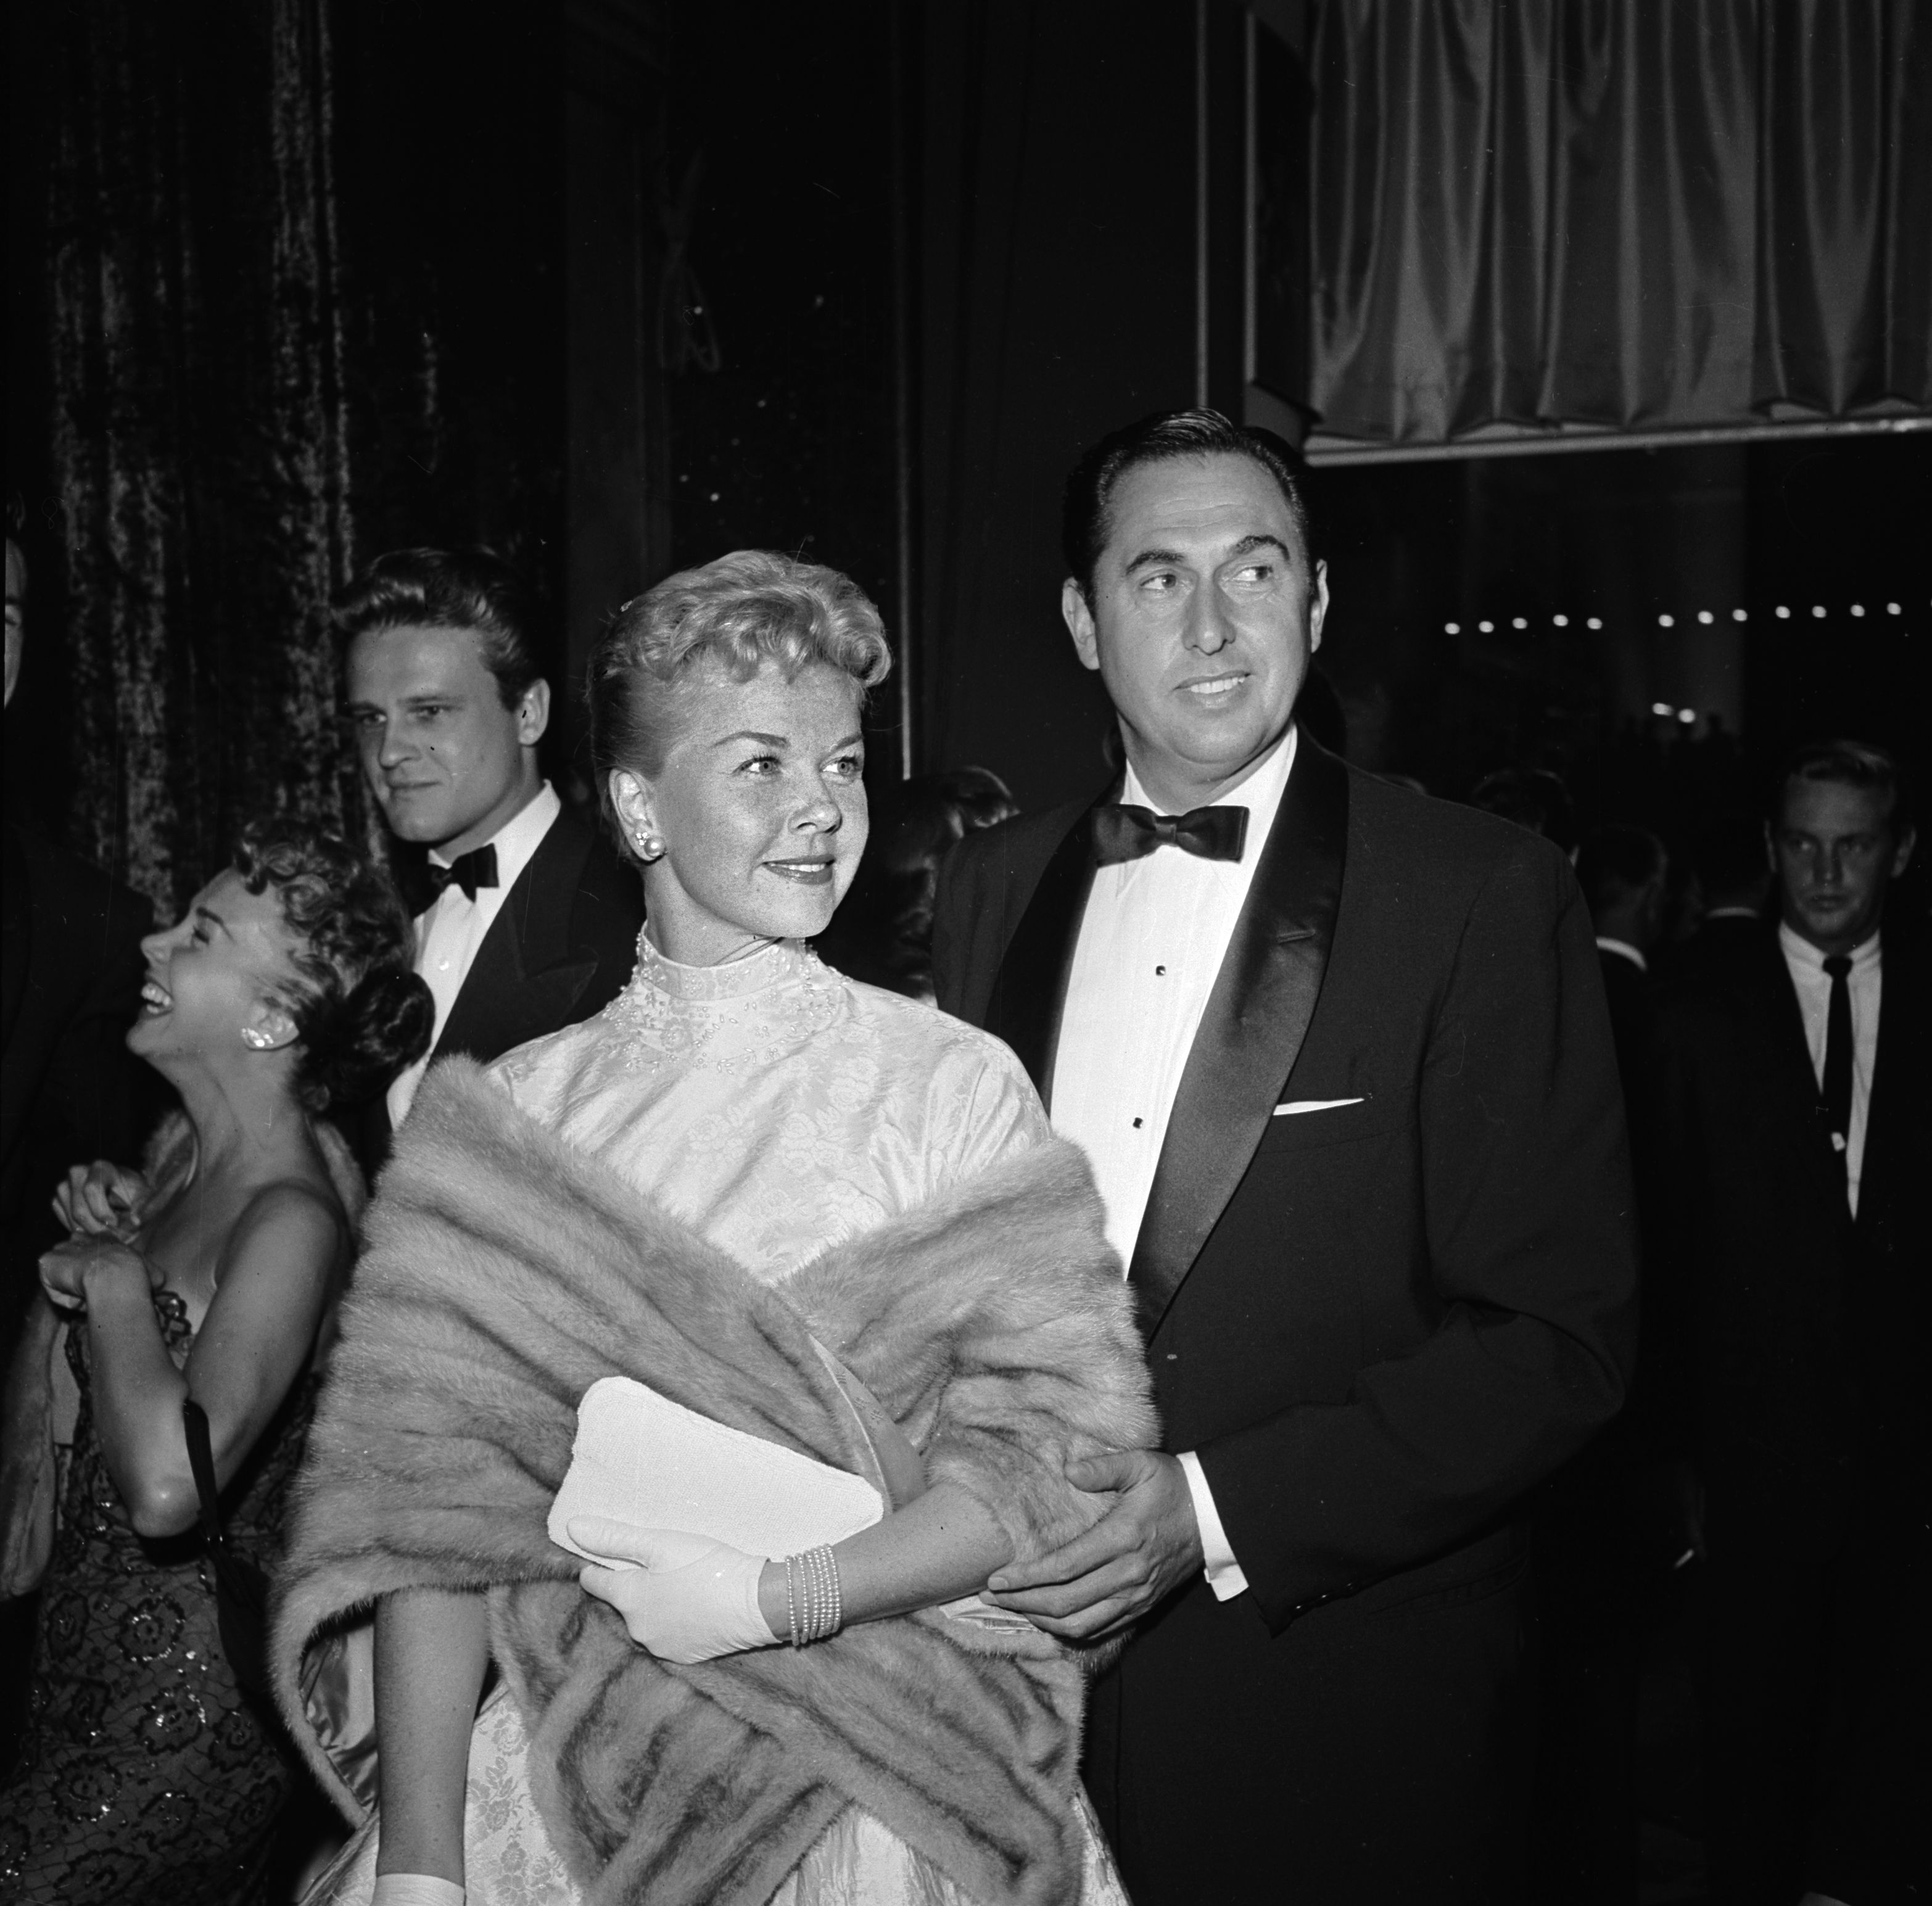 Doris Day with Marty Melcher at the film premiere of 'A Star Is Born' featuring Judy Garland.  